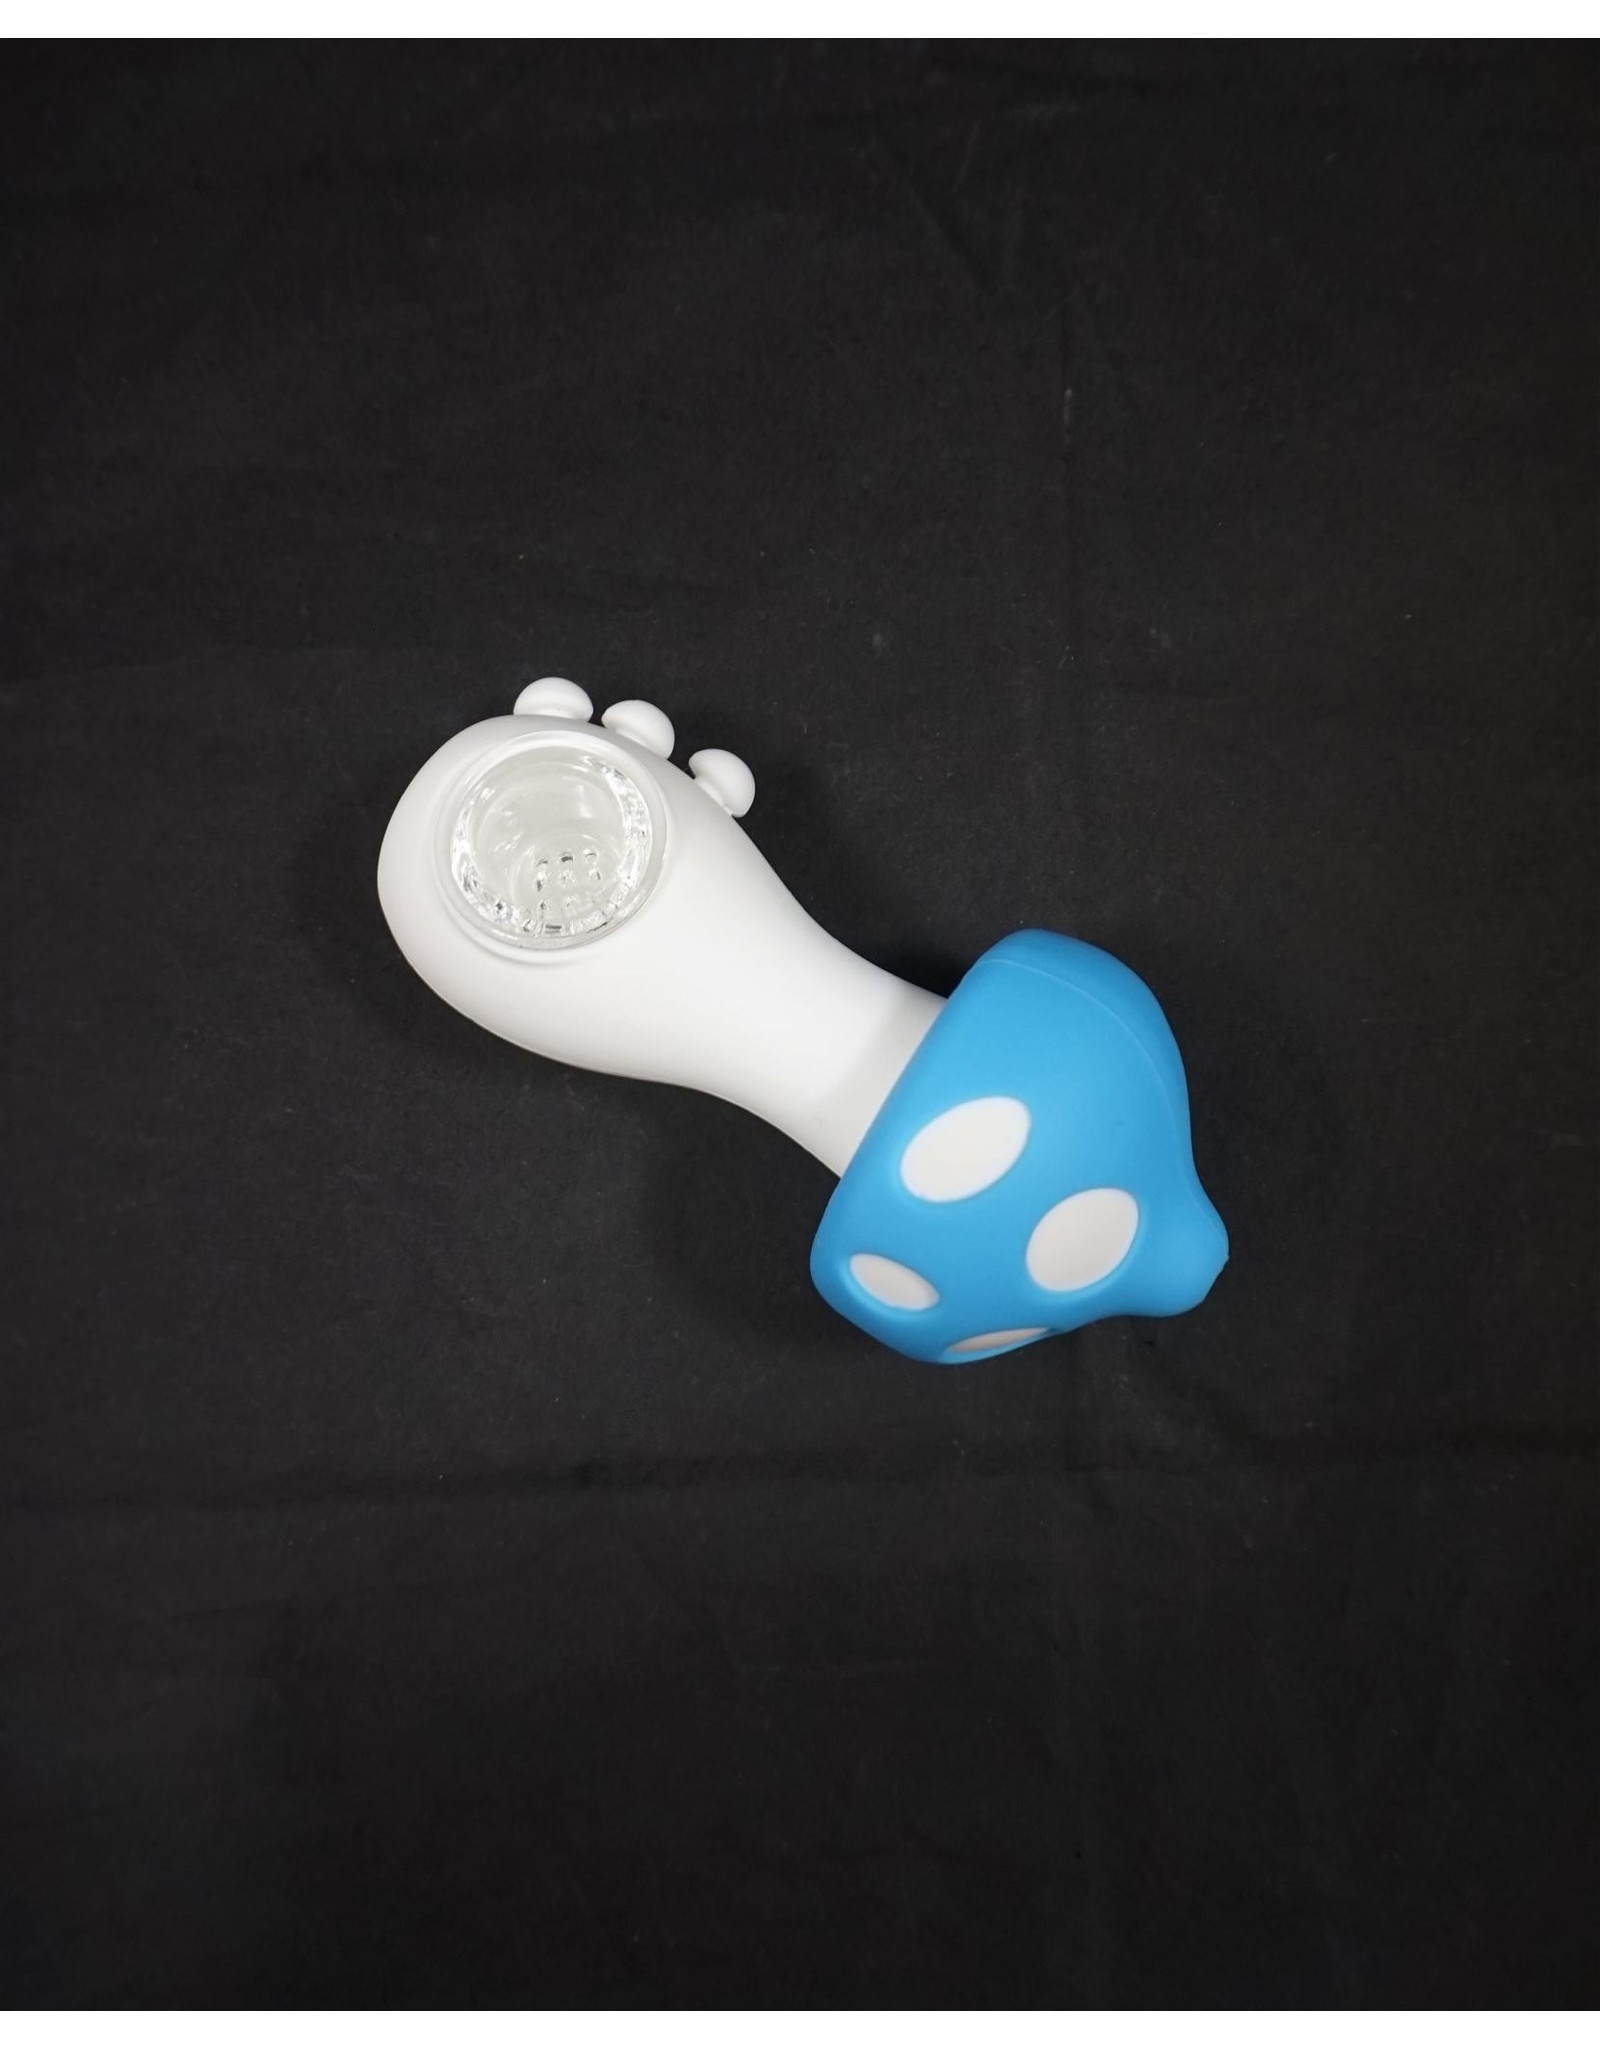 4.5" Glow in the Dark Silicone Mushroom - Assorted Colors